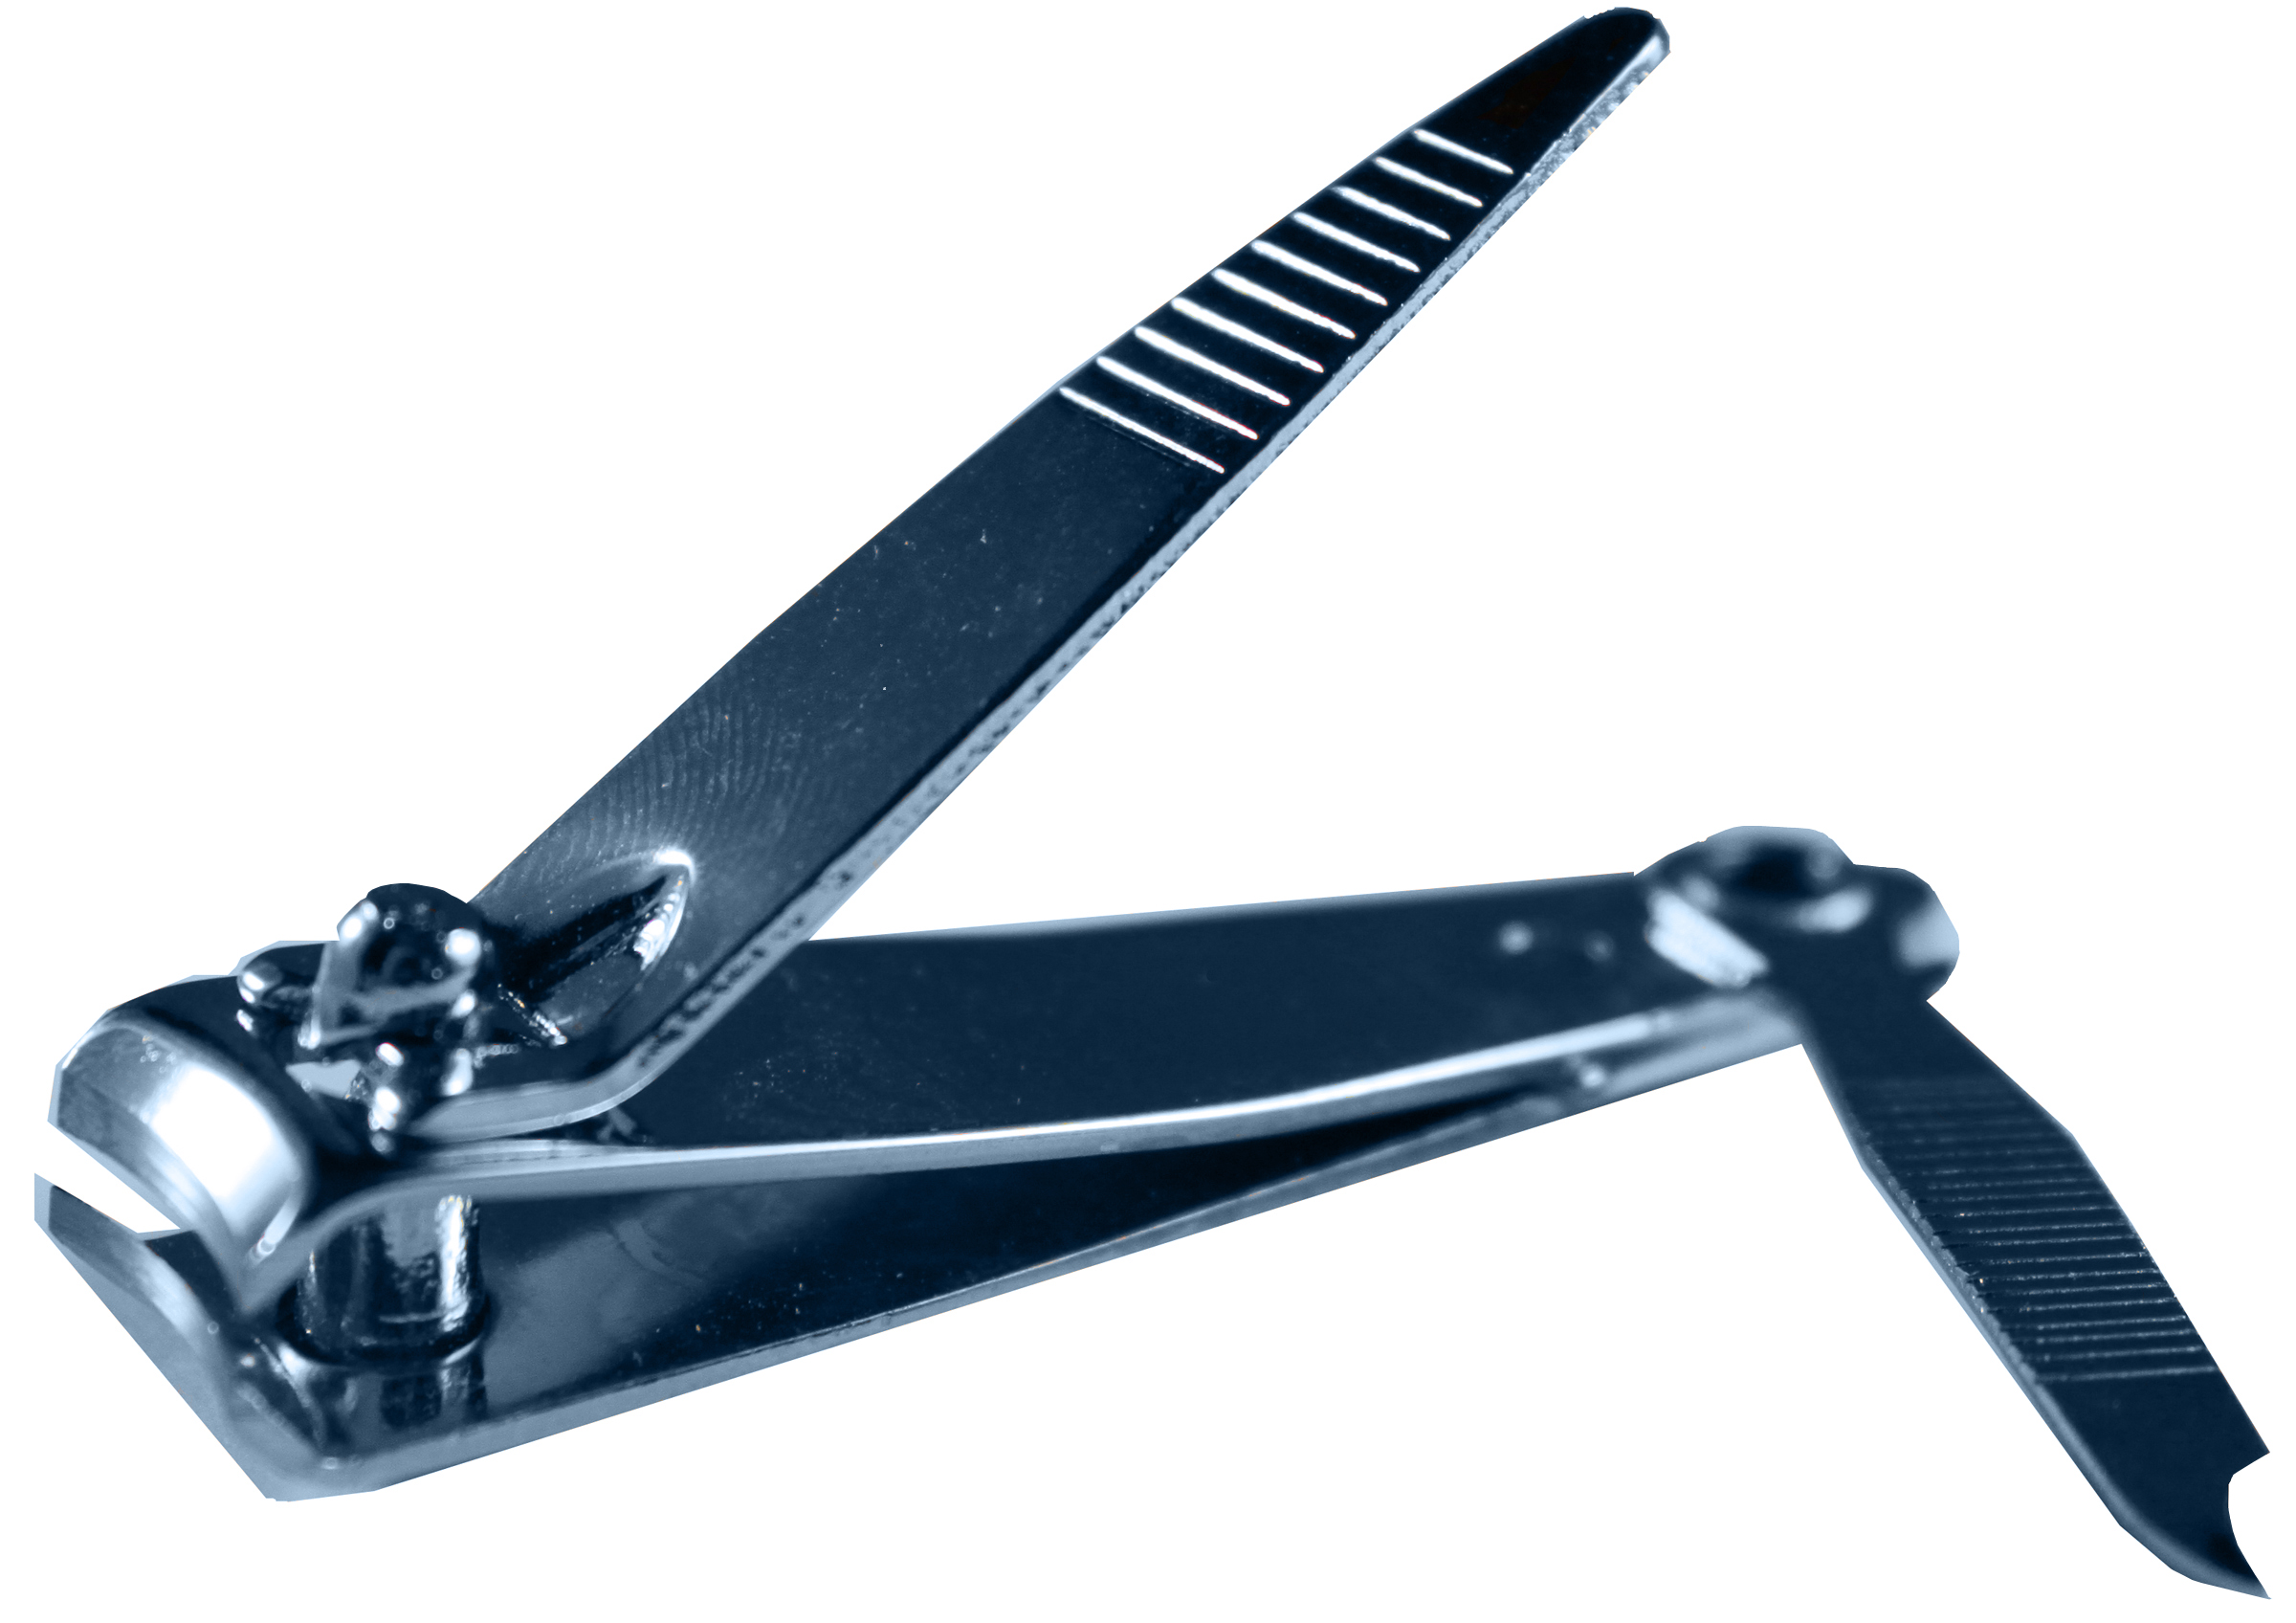 Finger NAIL Clippers (with File)